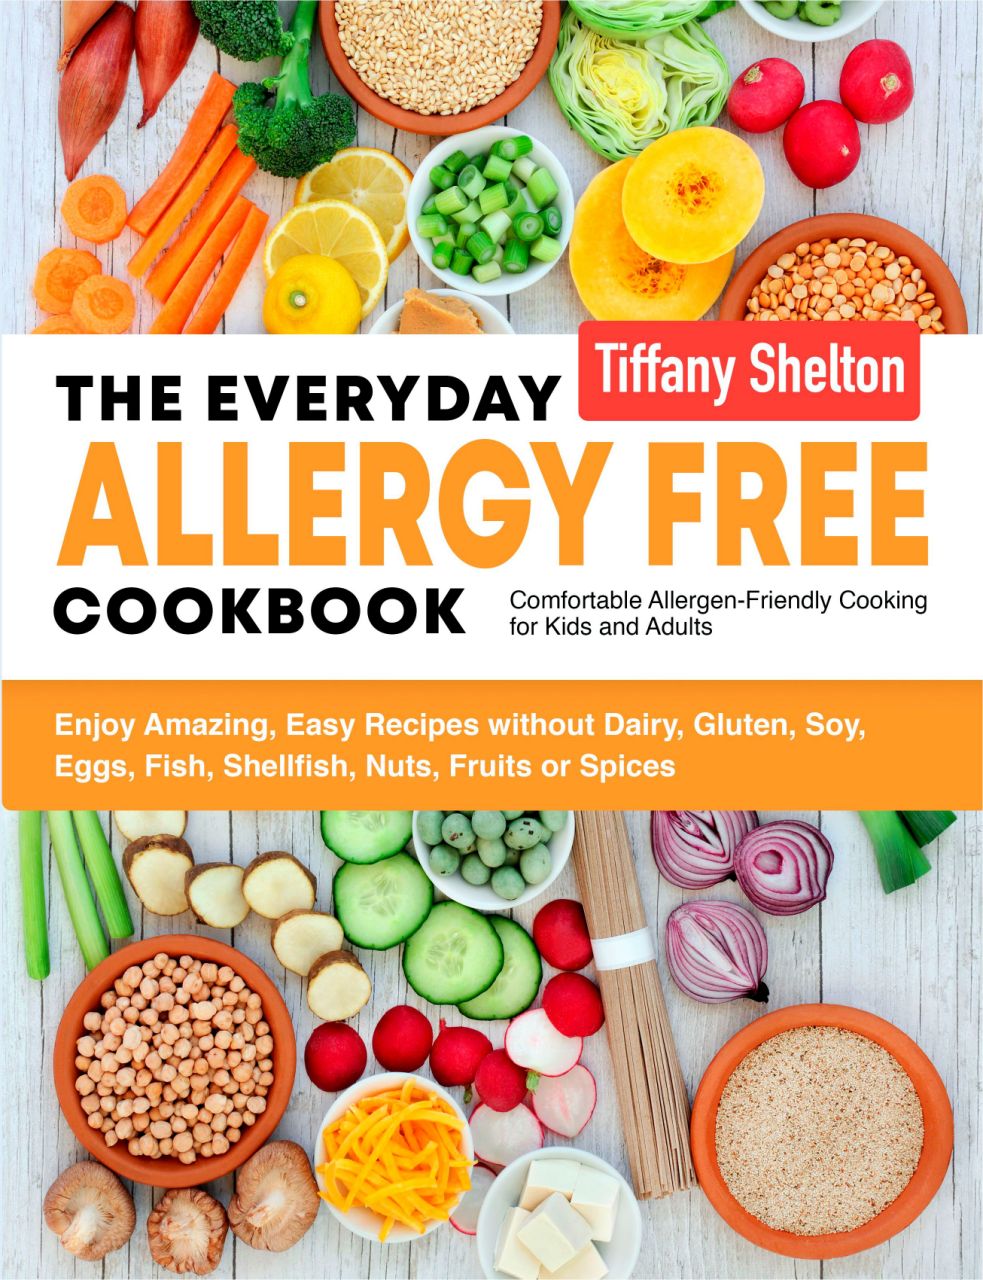 FREE: The Everyday Allergy Free Cookbook by Tiffany Shelton